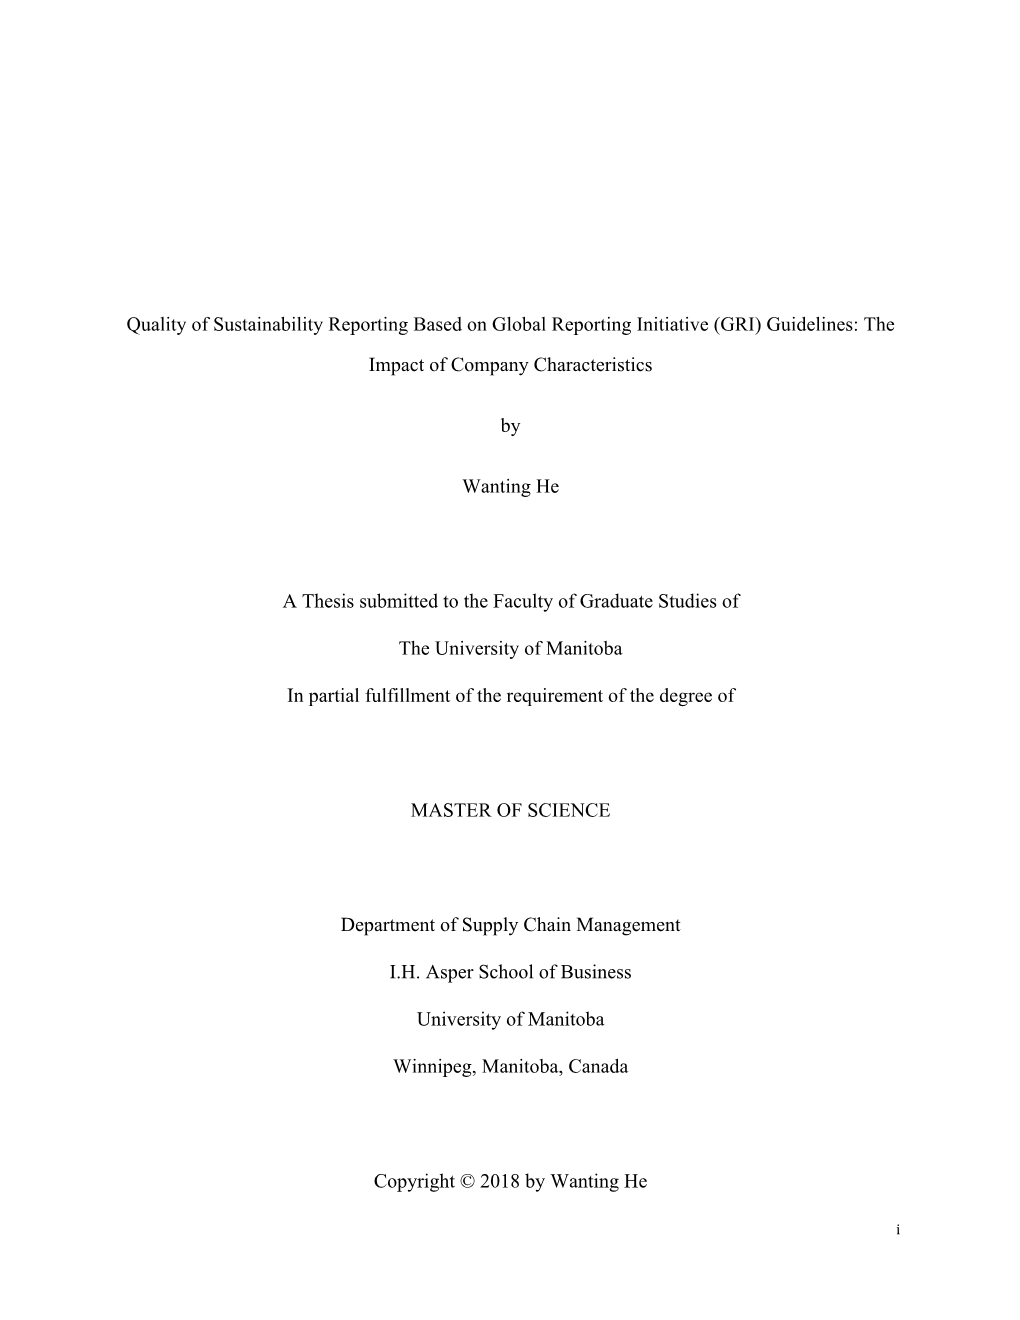 Quality of Sustainability Reporting Based on Global Reporting Initiative (GRI) Guidelines: The